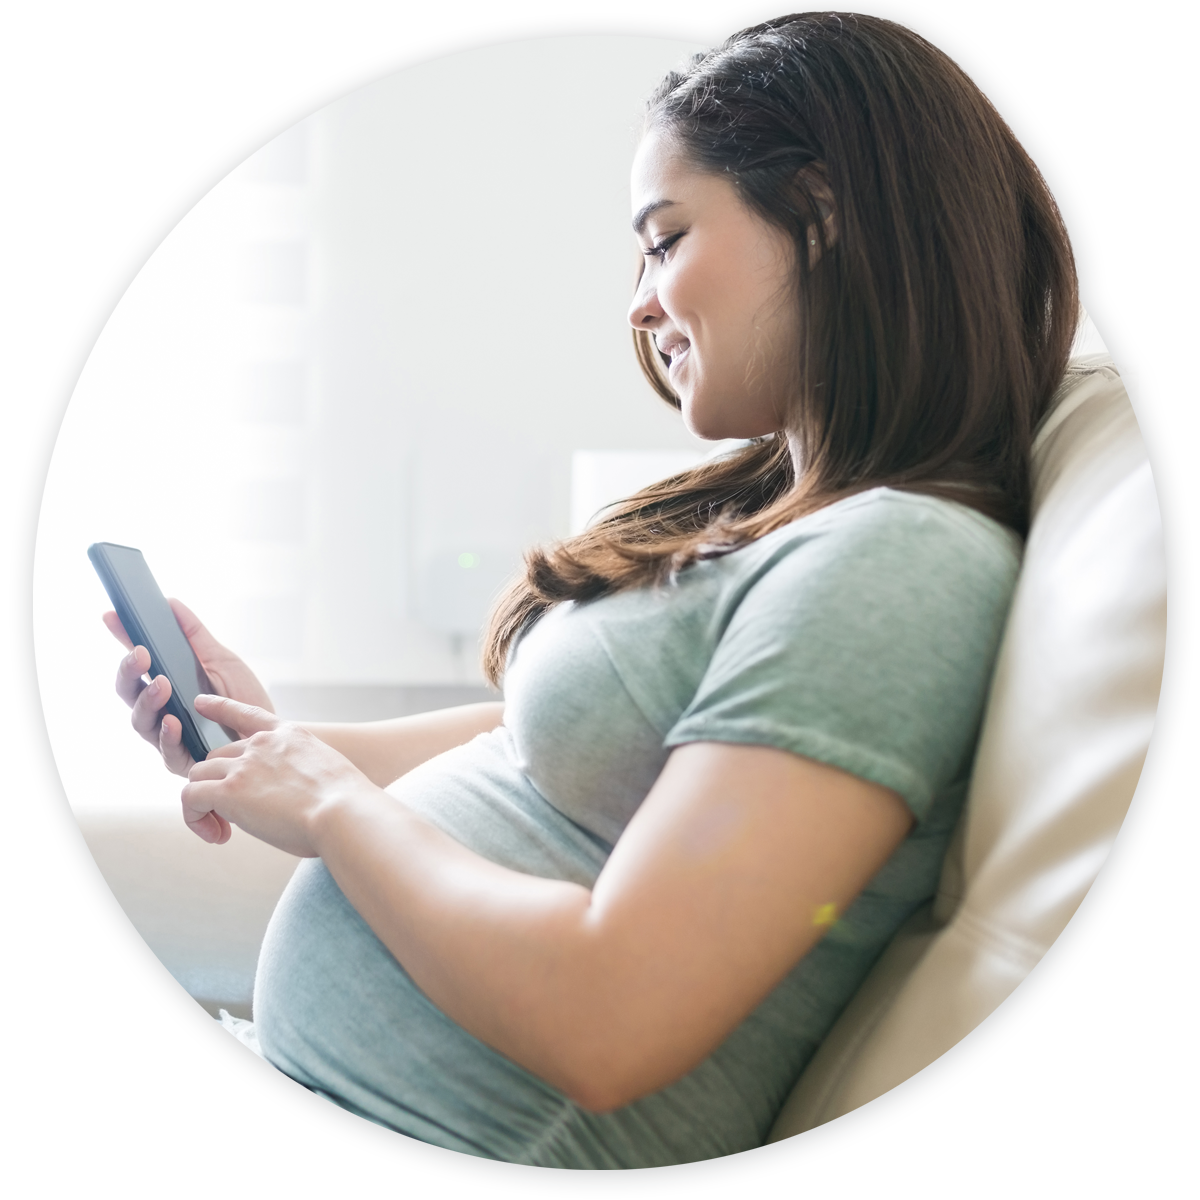 Pregnant woman making OB/GYN appointment on mobile phone